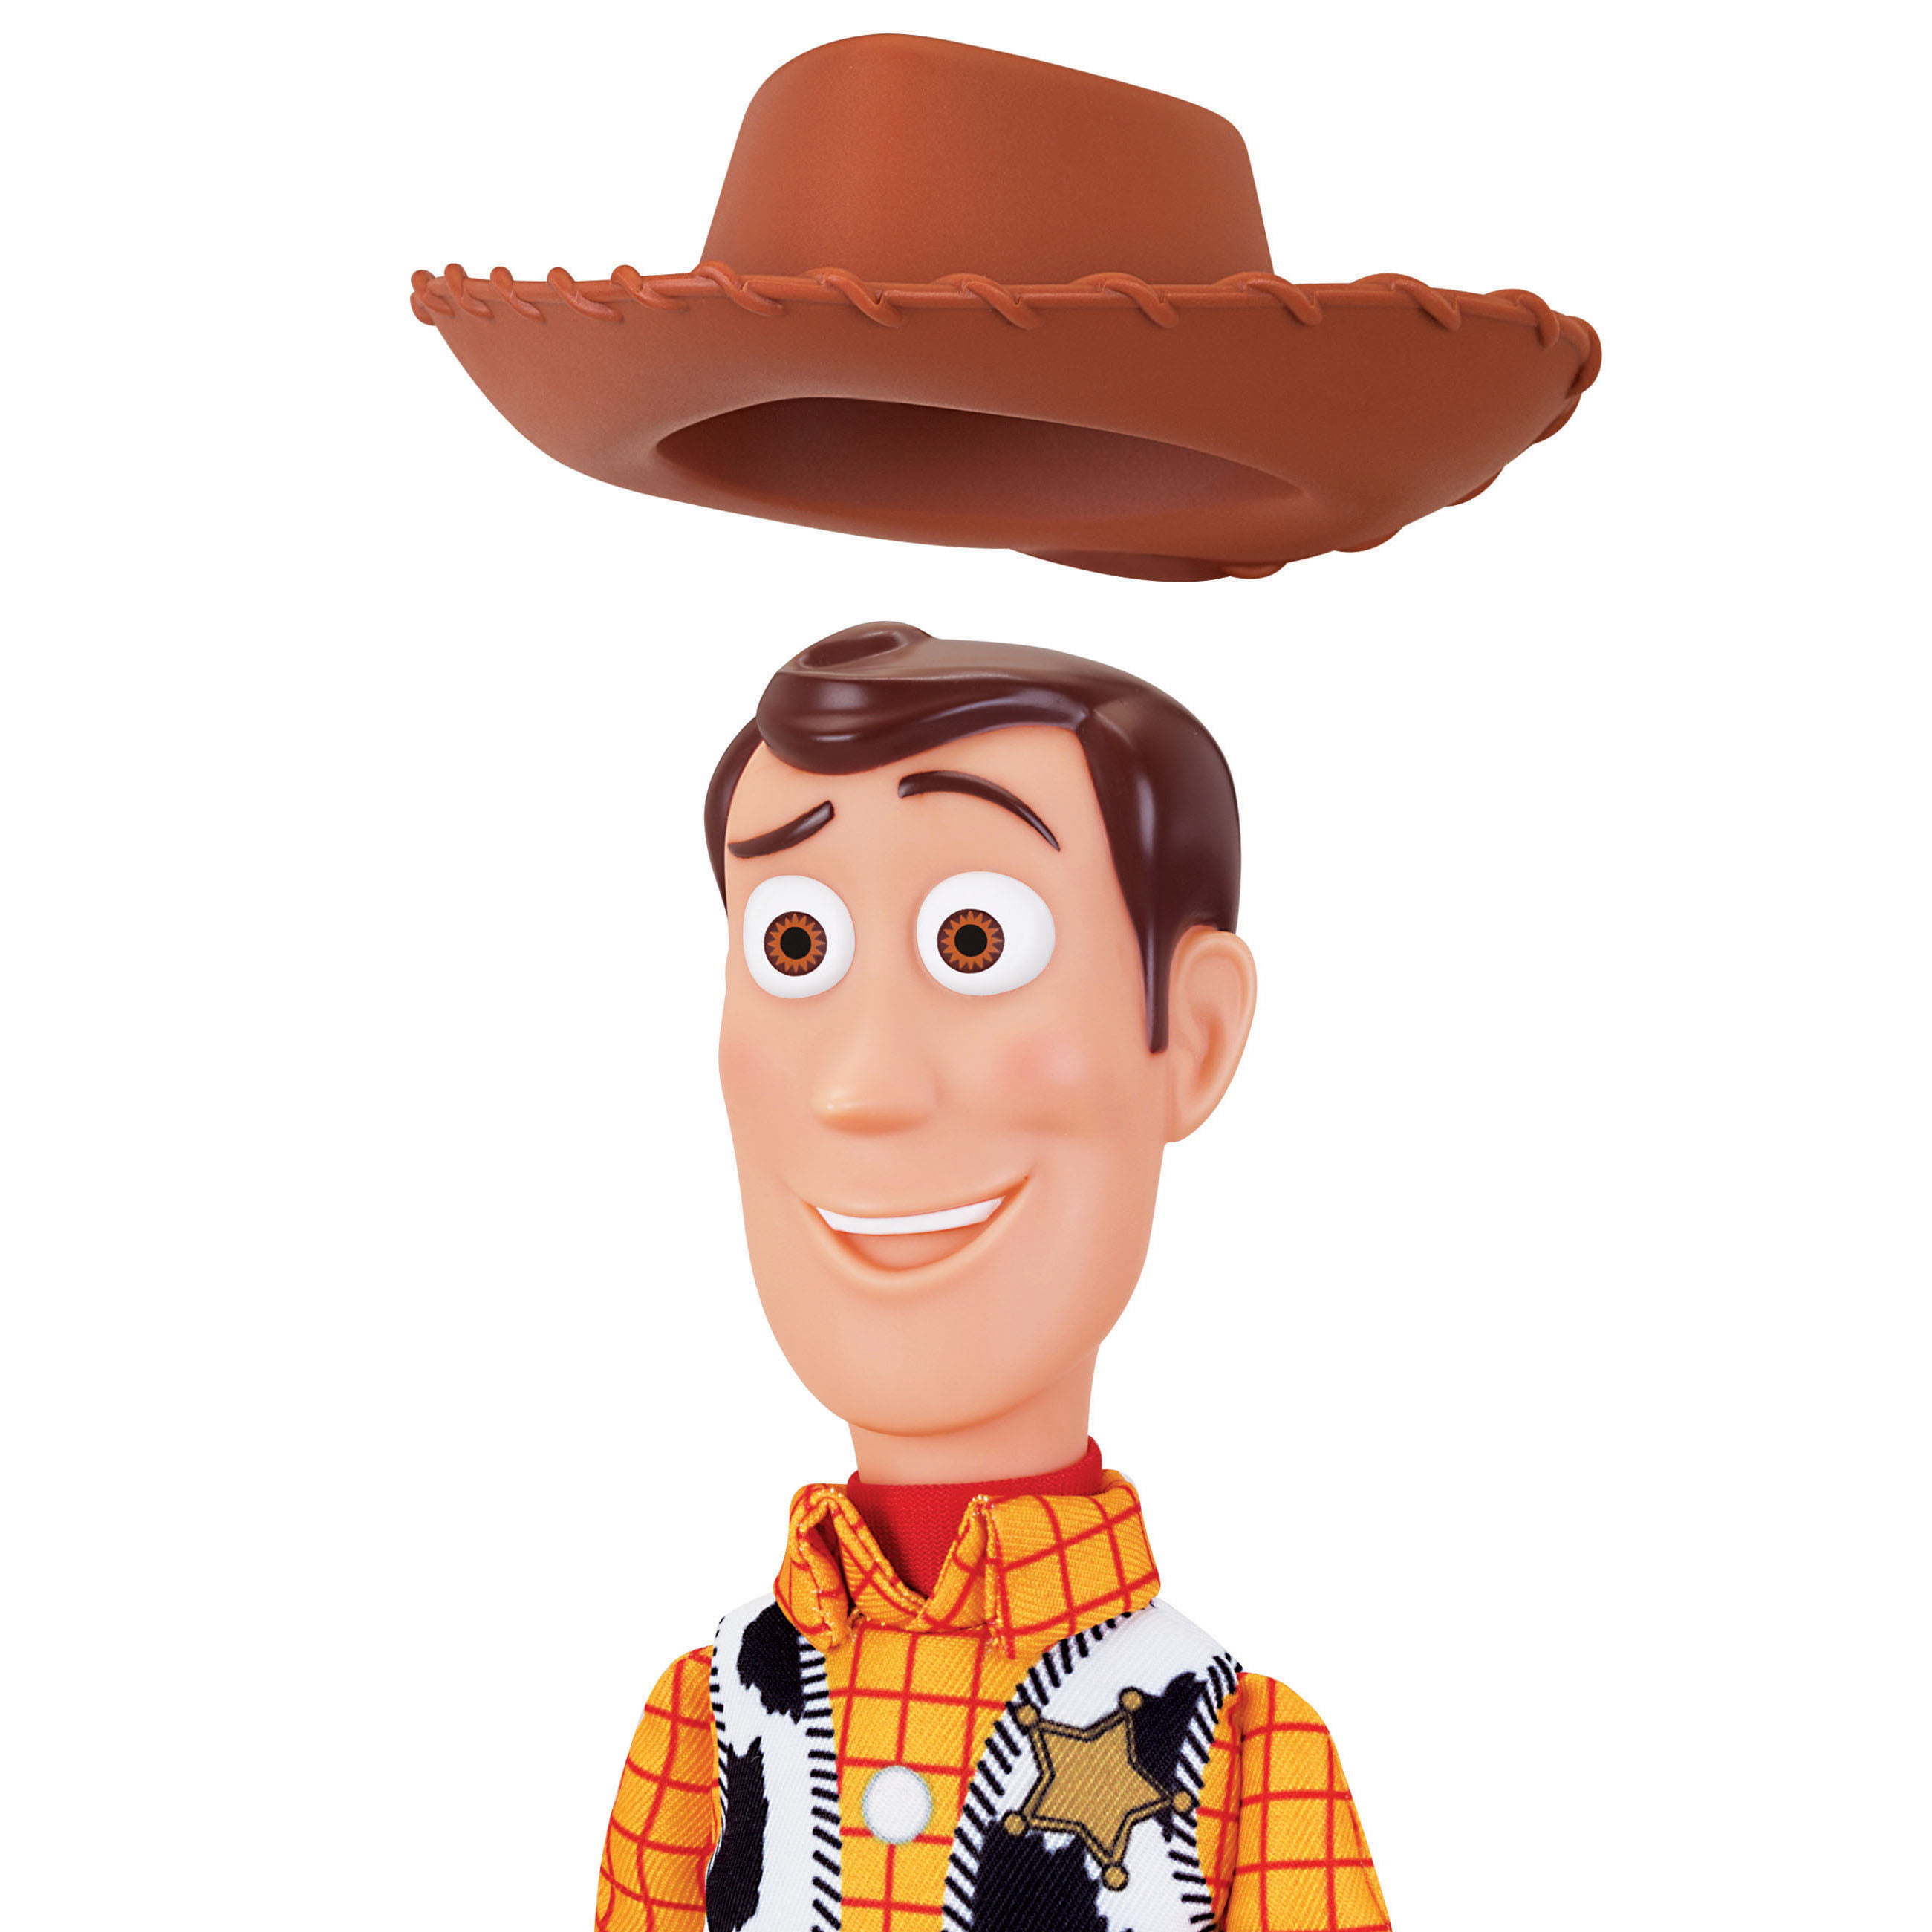 Disney Pixar Toy Story 4 Sheriff Woody Deluxe Pull-String Talking Action Figure 